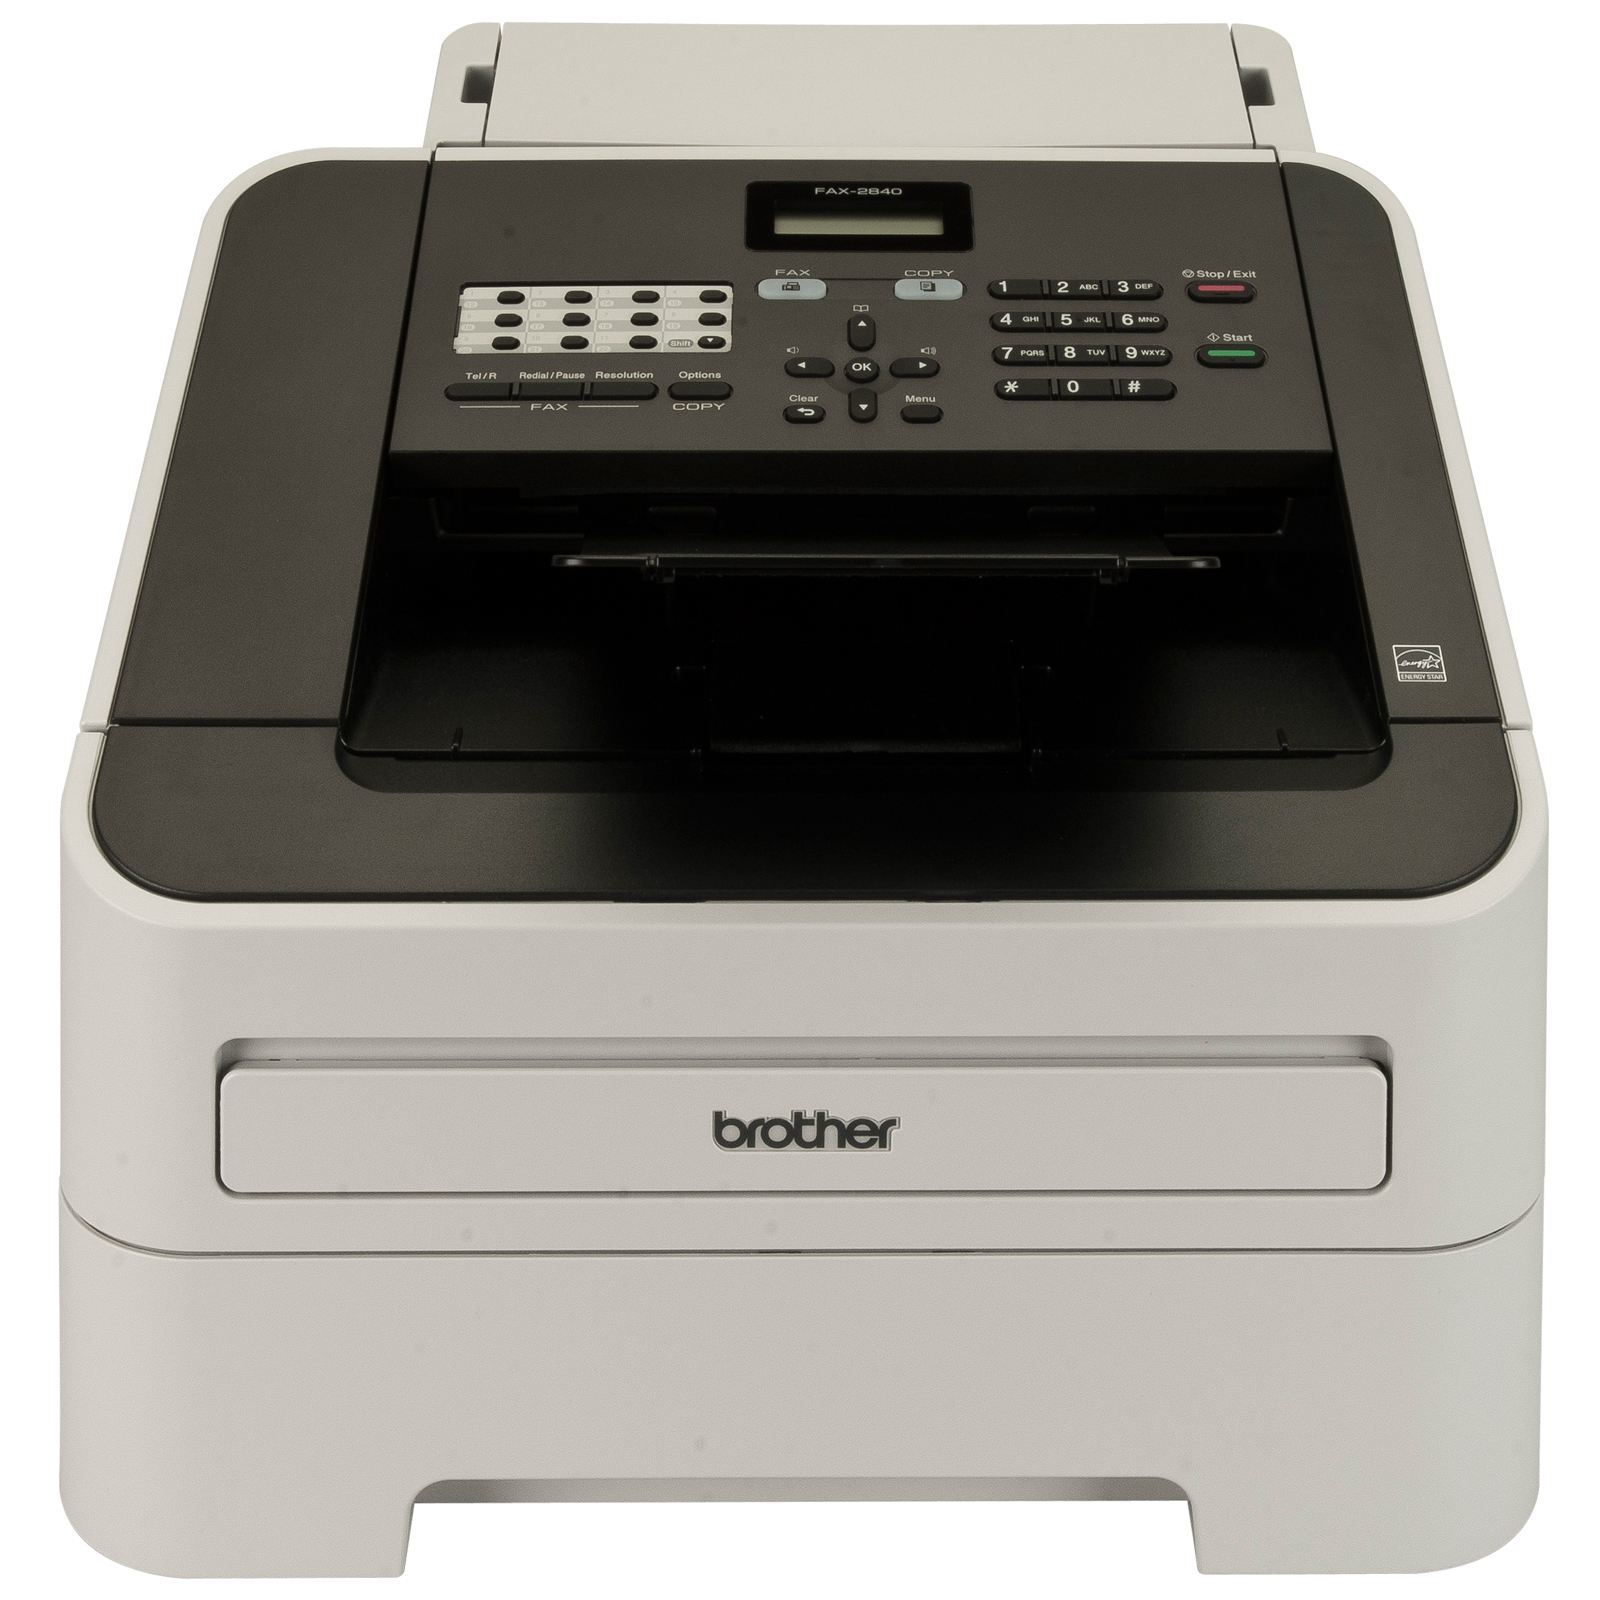 Brother Fax-2840 Fax-2840 - Refurbished